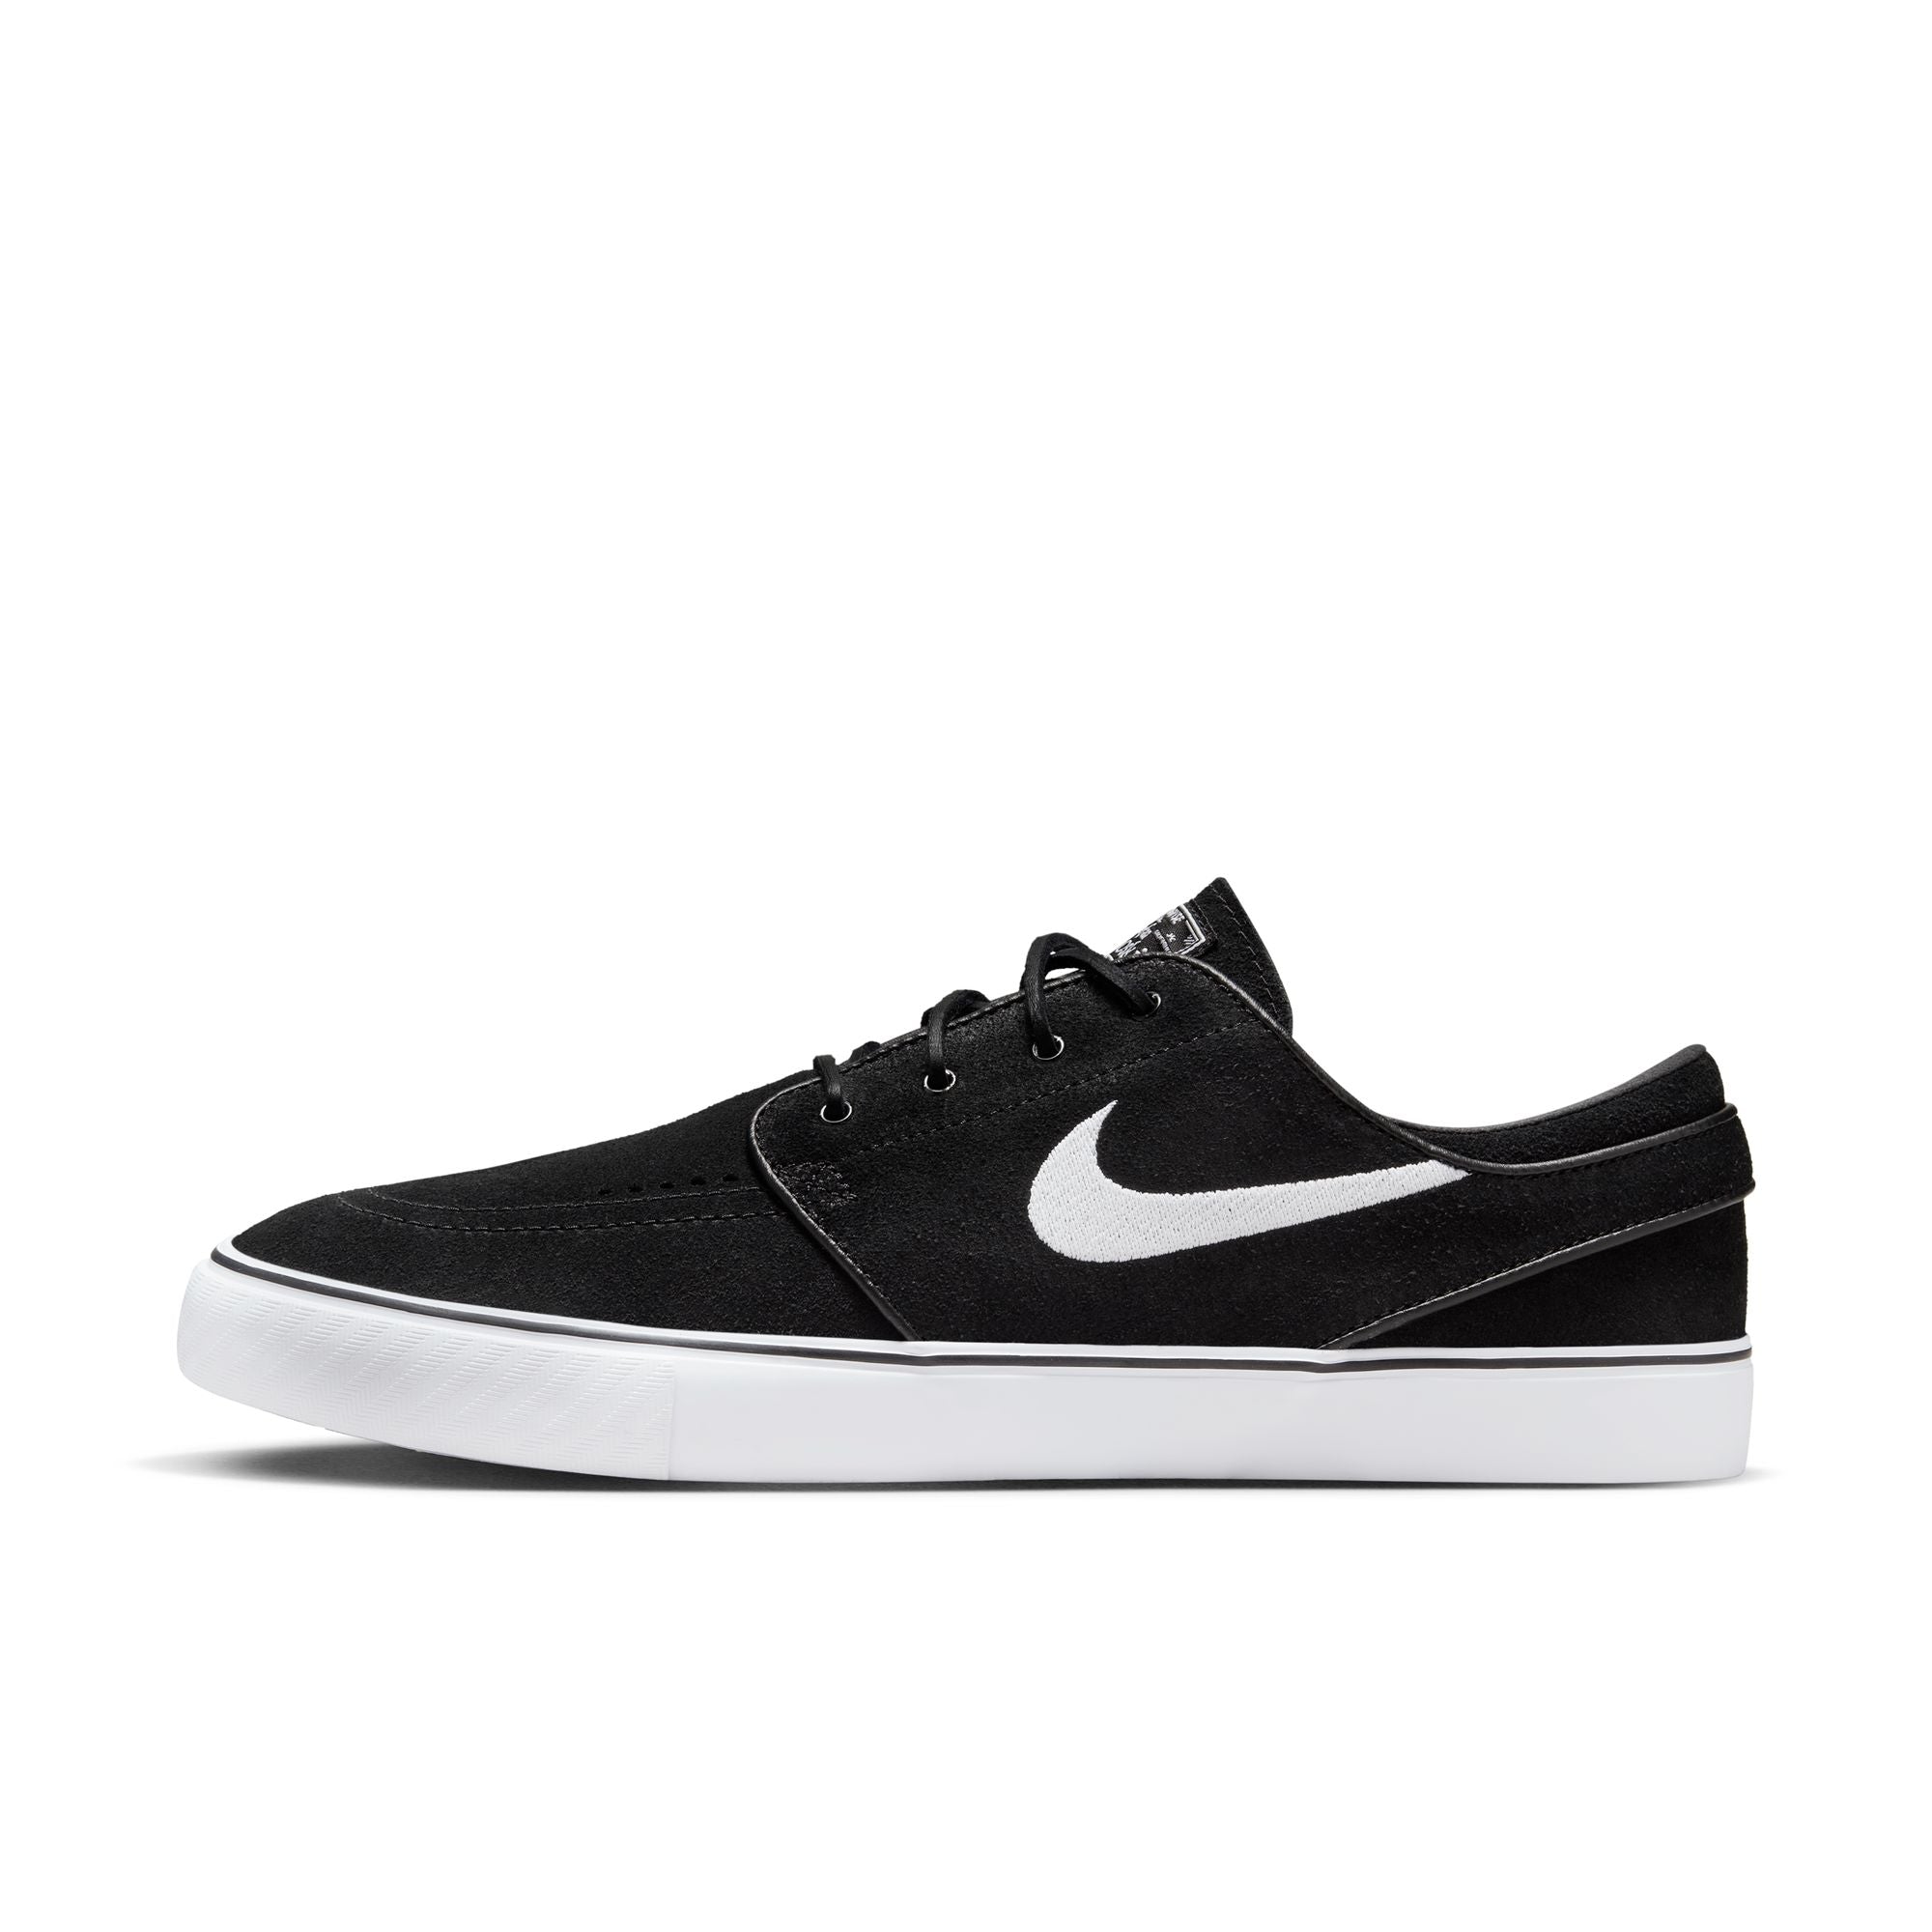 Low top Nike SB janoski skate shoes, in black and white colourway with white nike swoosh on sides. 